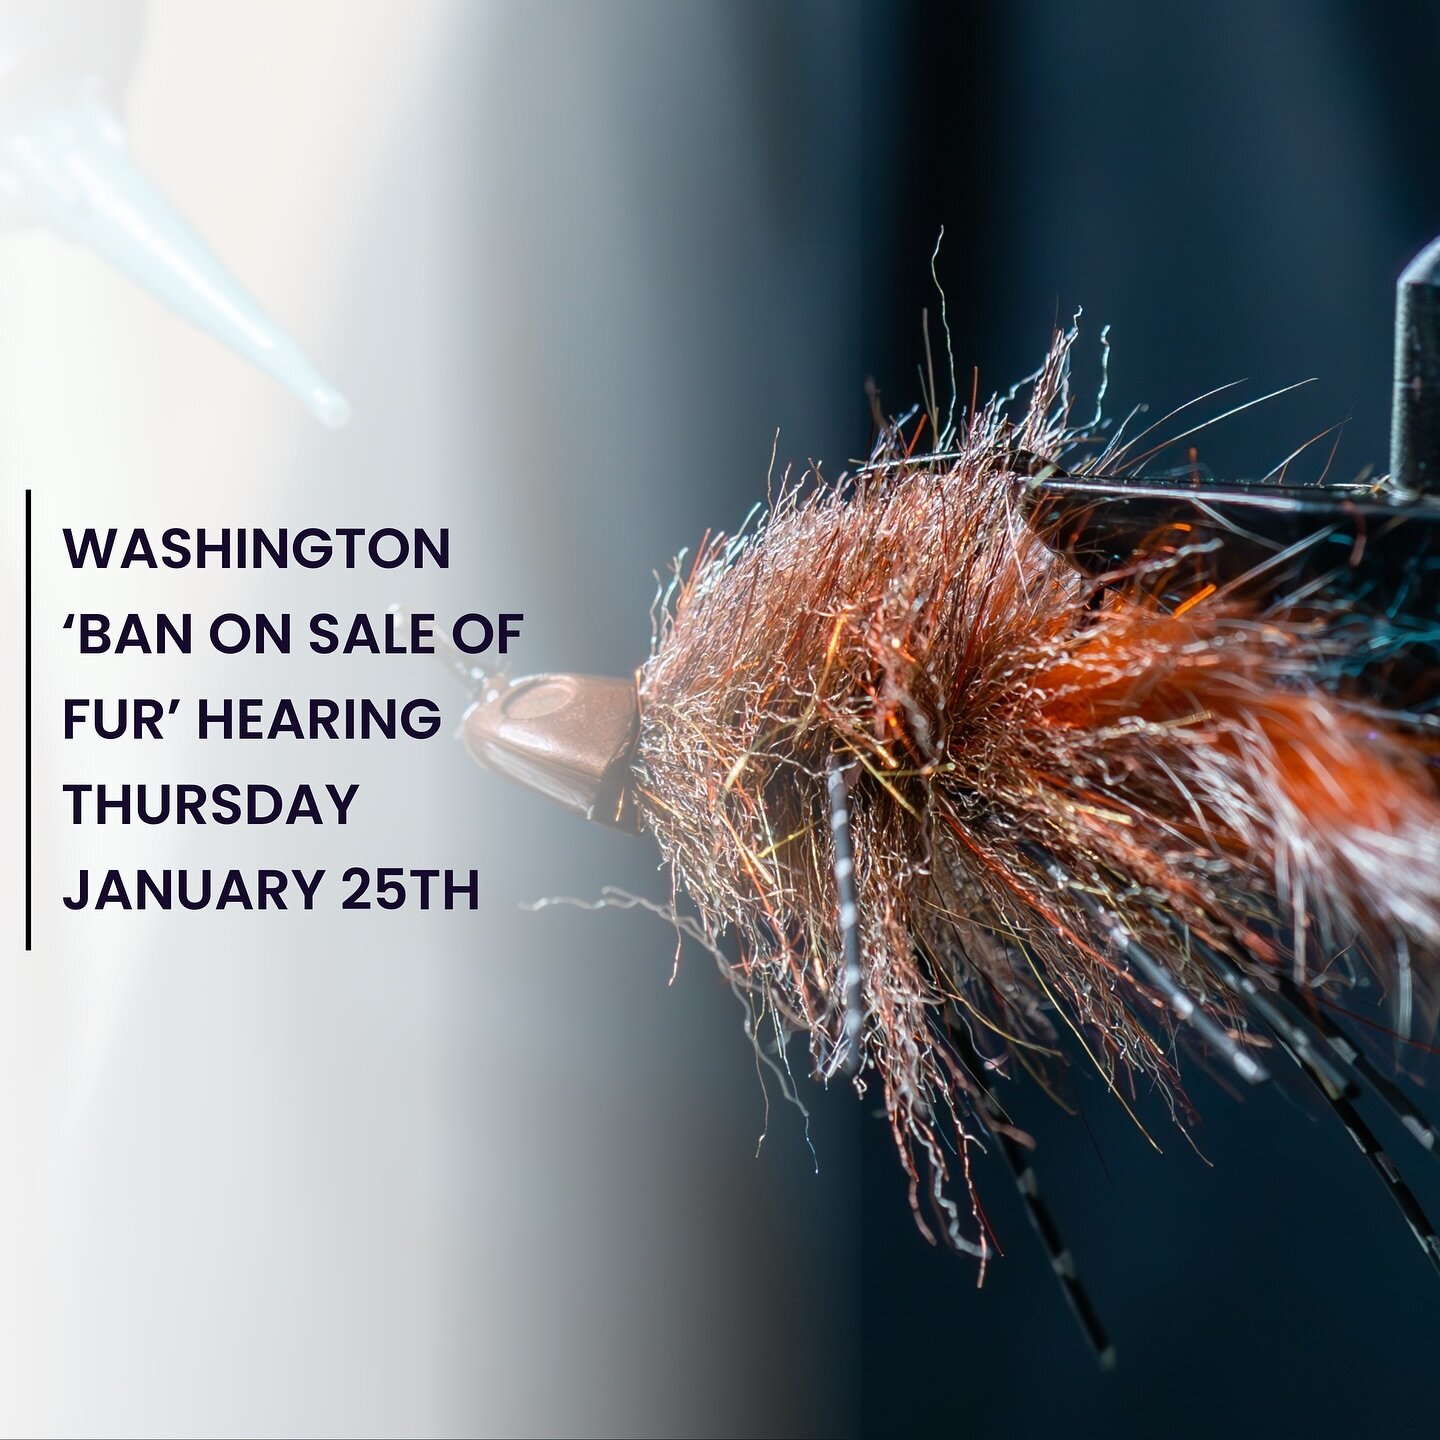 Washington Ban on Sale of Fur hearing is this Thursday the 25th. | Urgent Action Needed! 

Senator Stanford&rsquo;s SB 6294 bans the sale, offer for sale, display for sale, trade, or otherwise distribute for monetary or nonmonetary consideration a fu